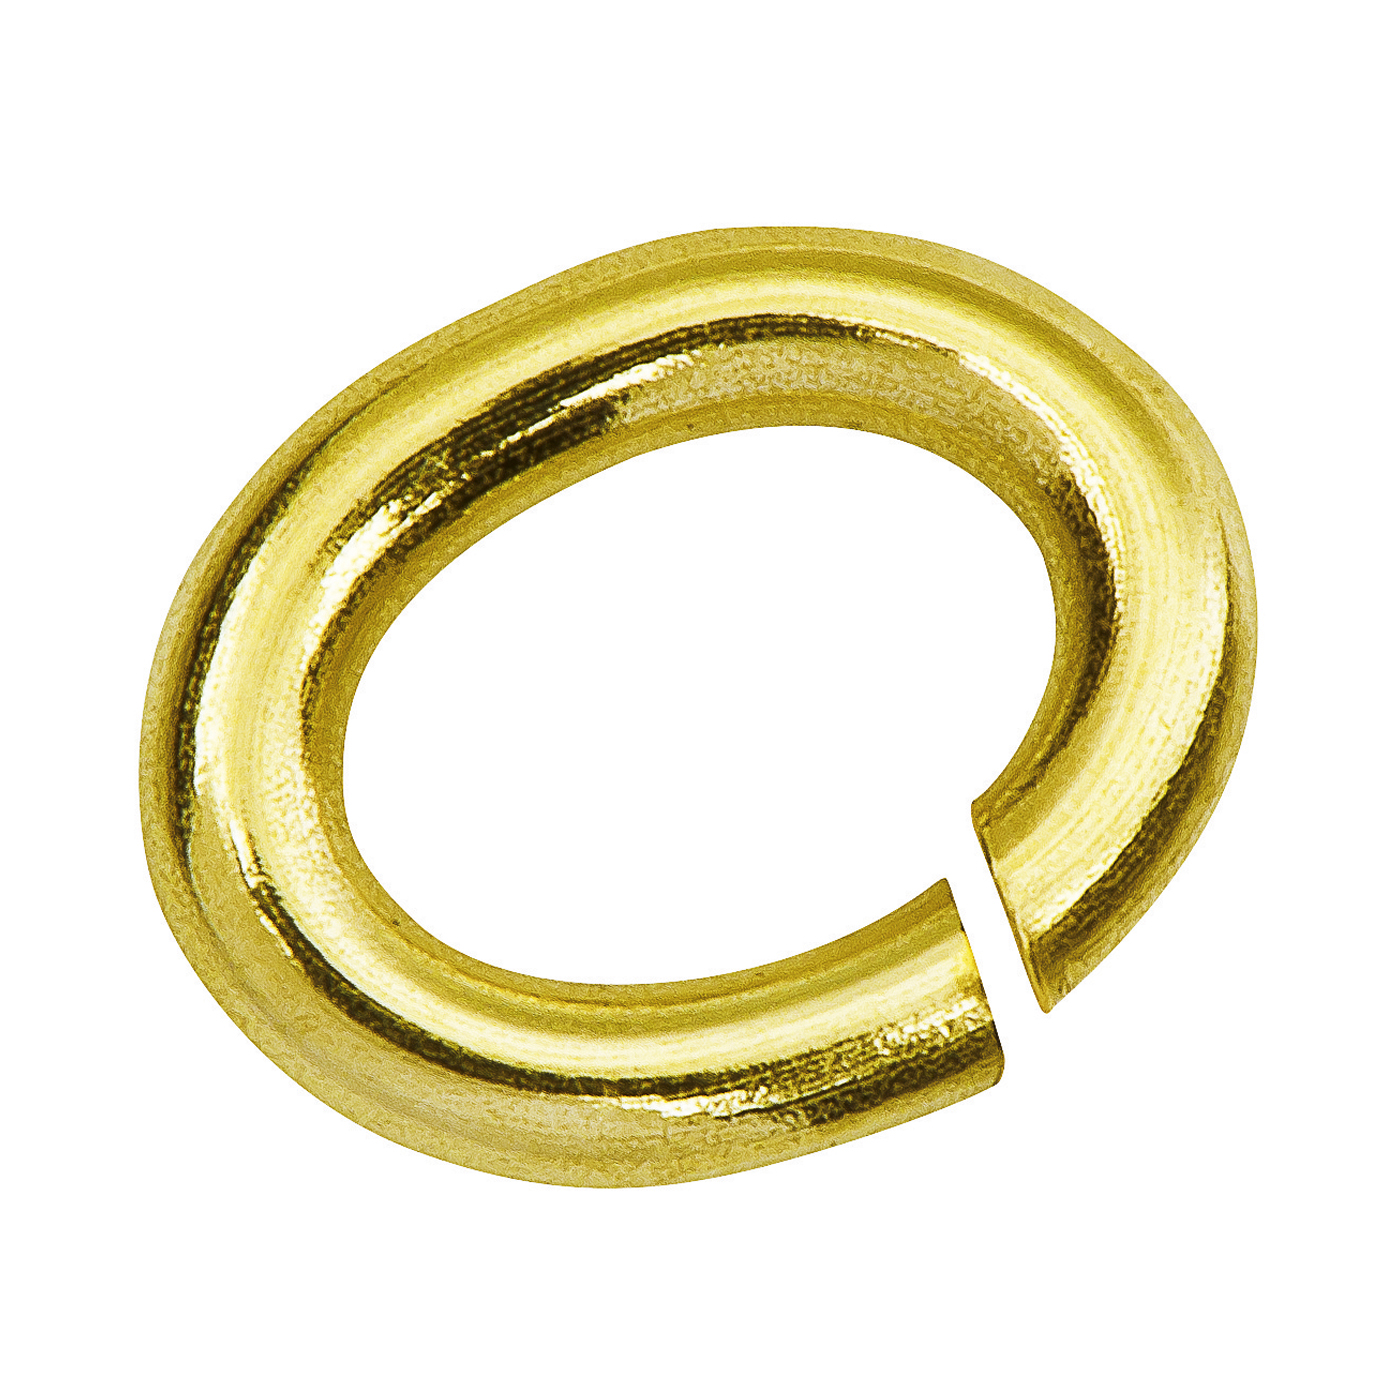 Binding Rings, oval, 585G, ø 6 mm - 5 pieces